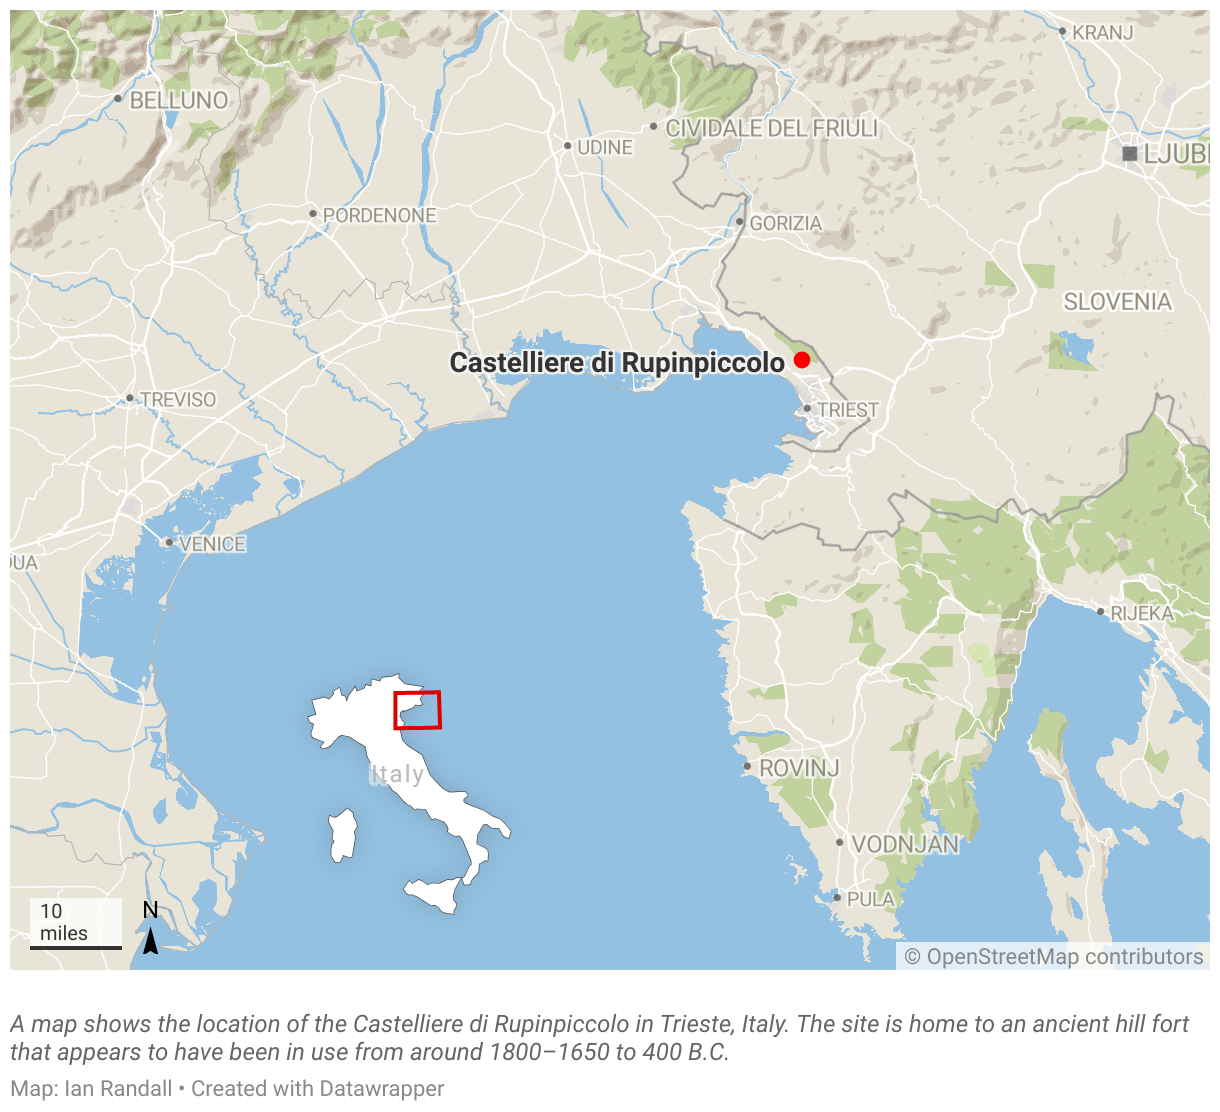 A map shows the location of the Castelliere di Rupinpiccolo in Trieste, Italy.